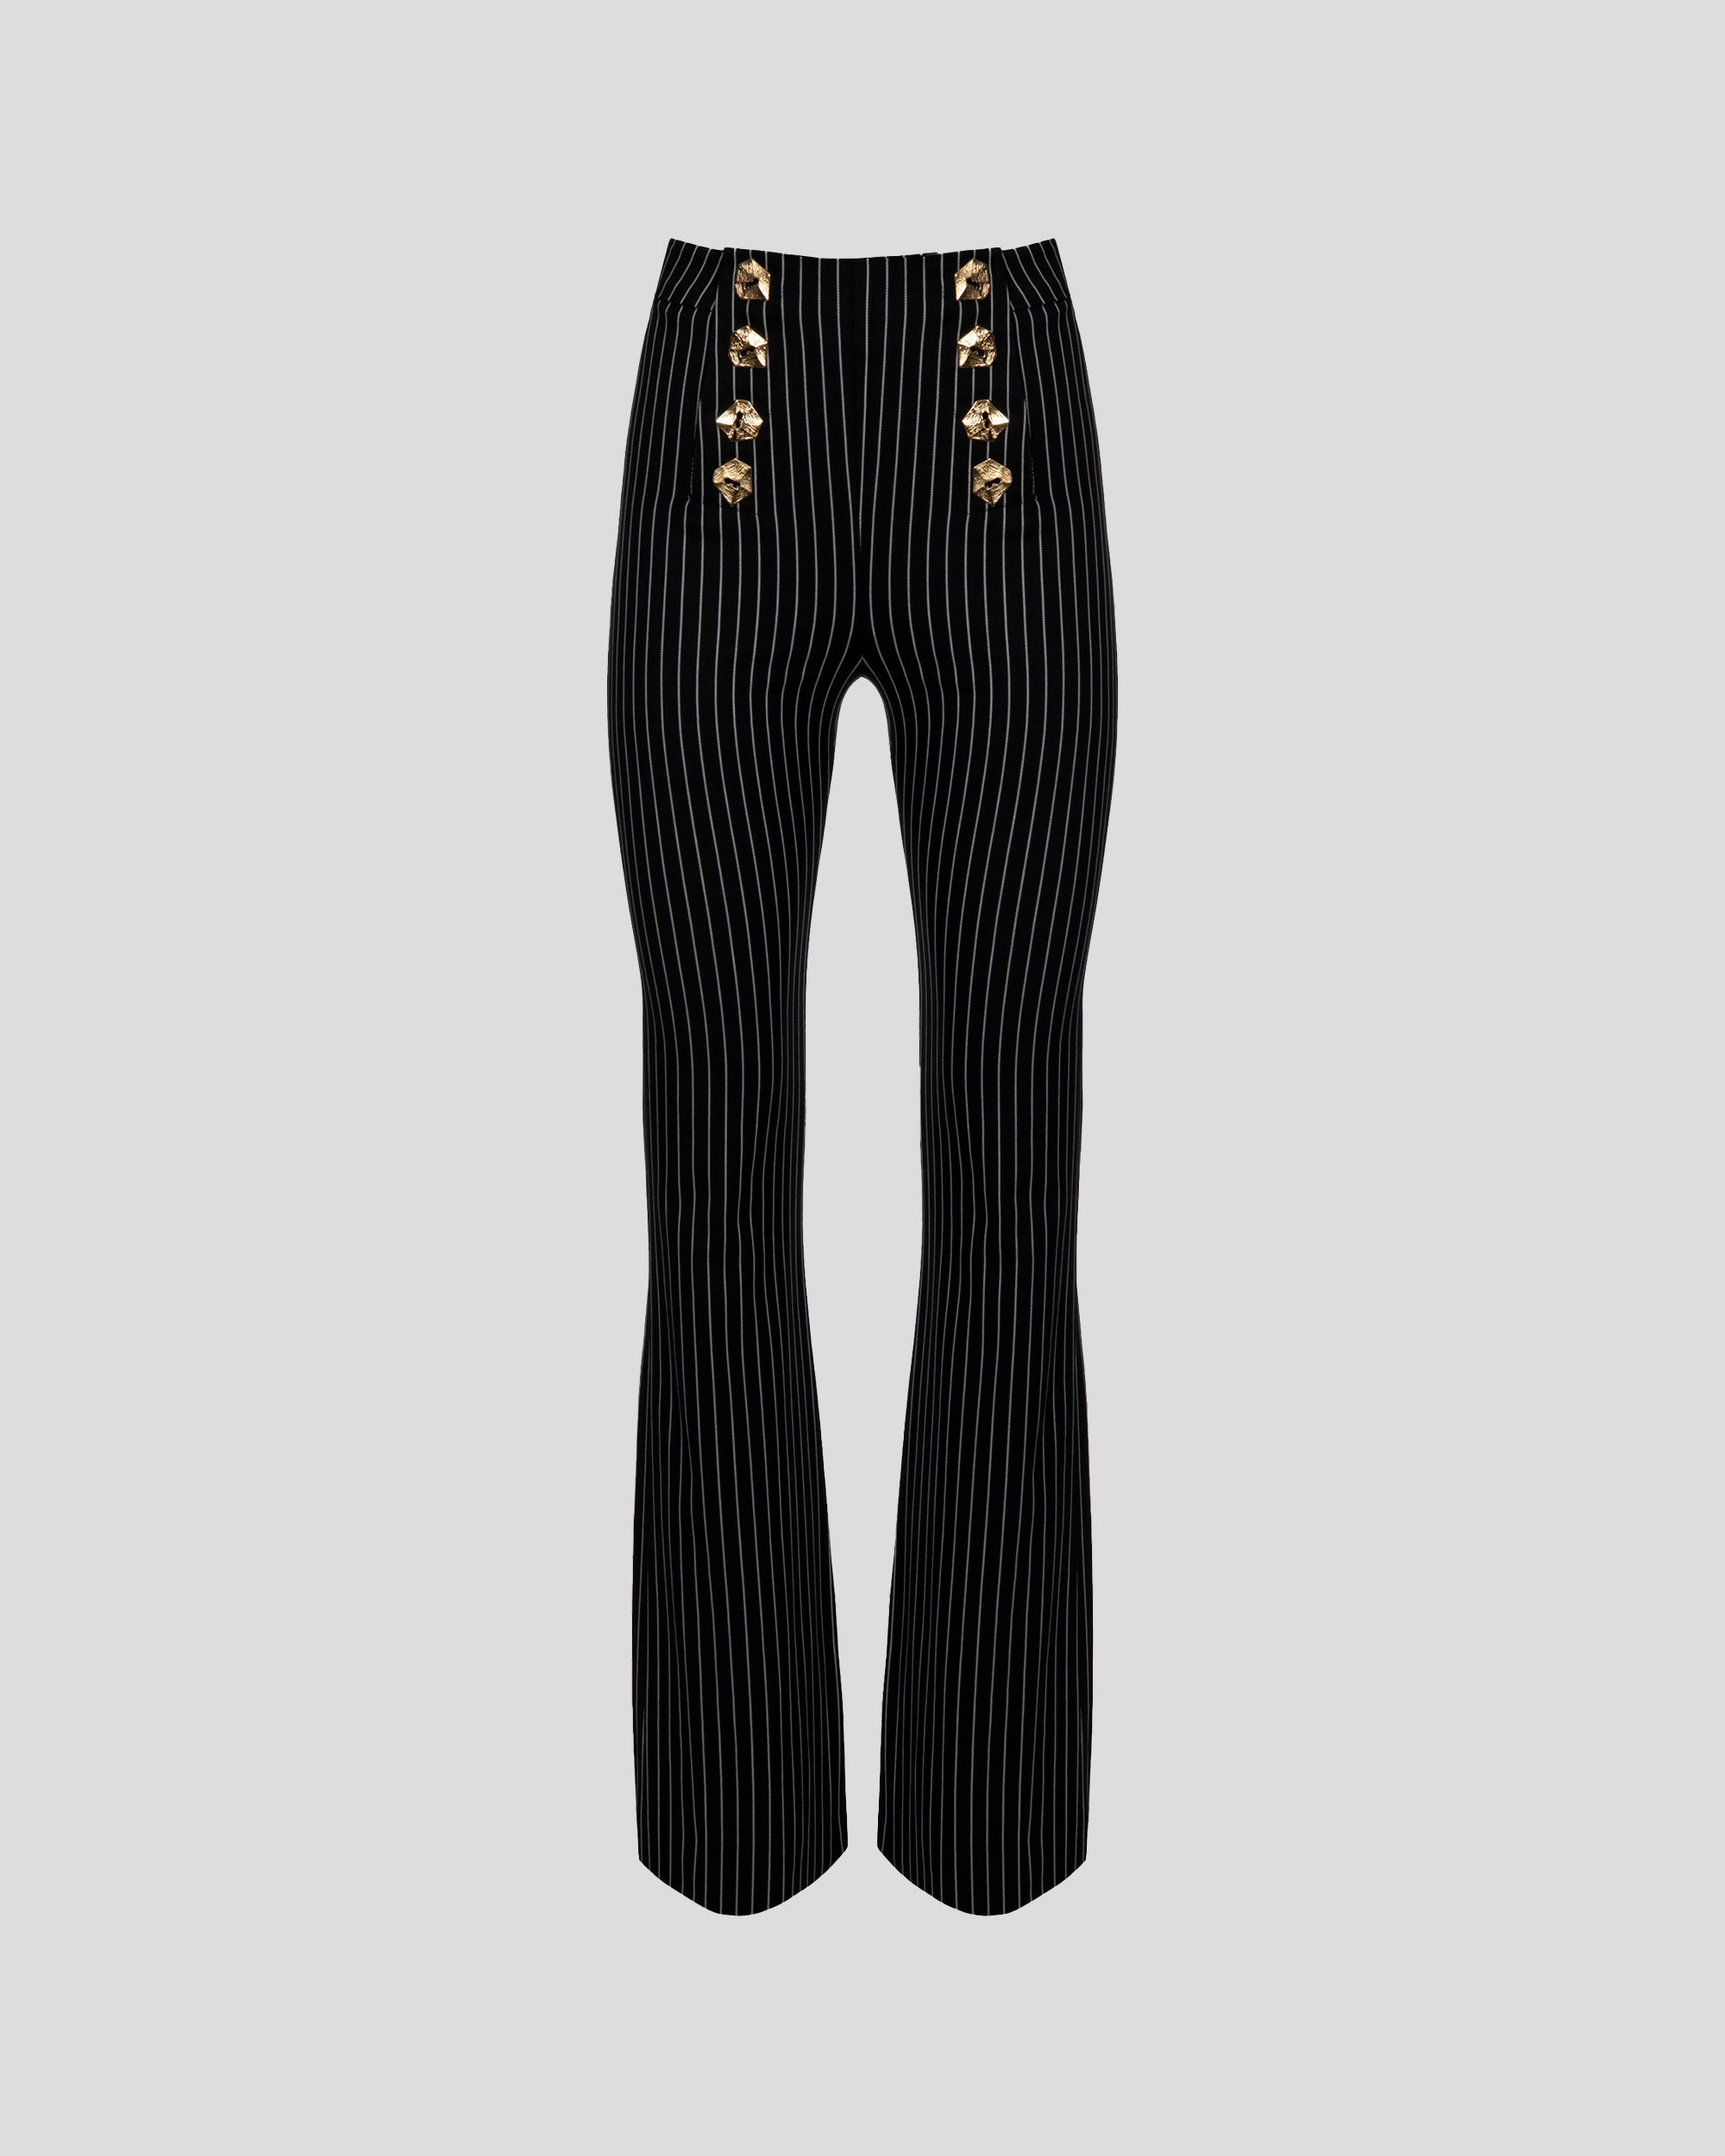 Matisse Trousers